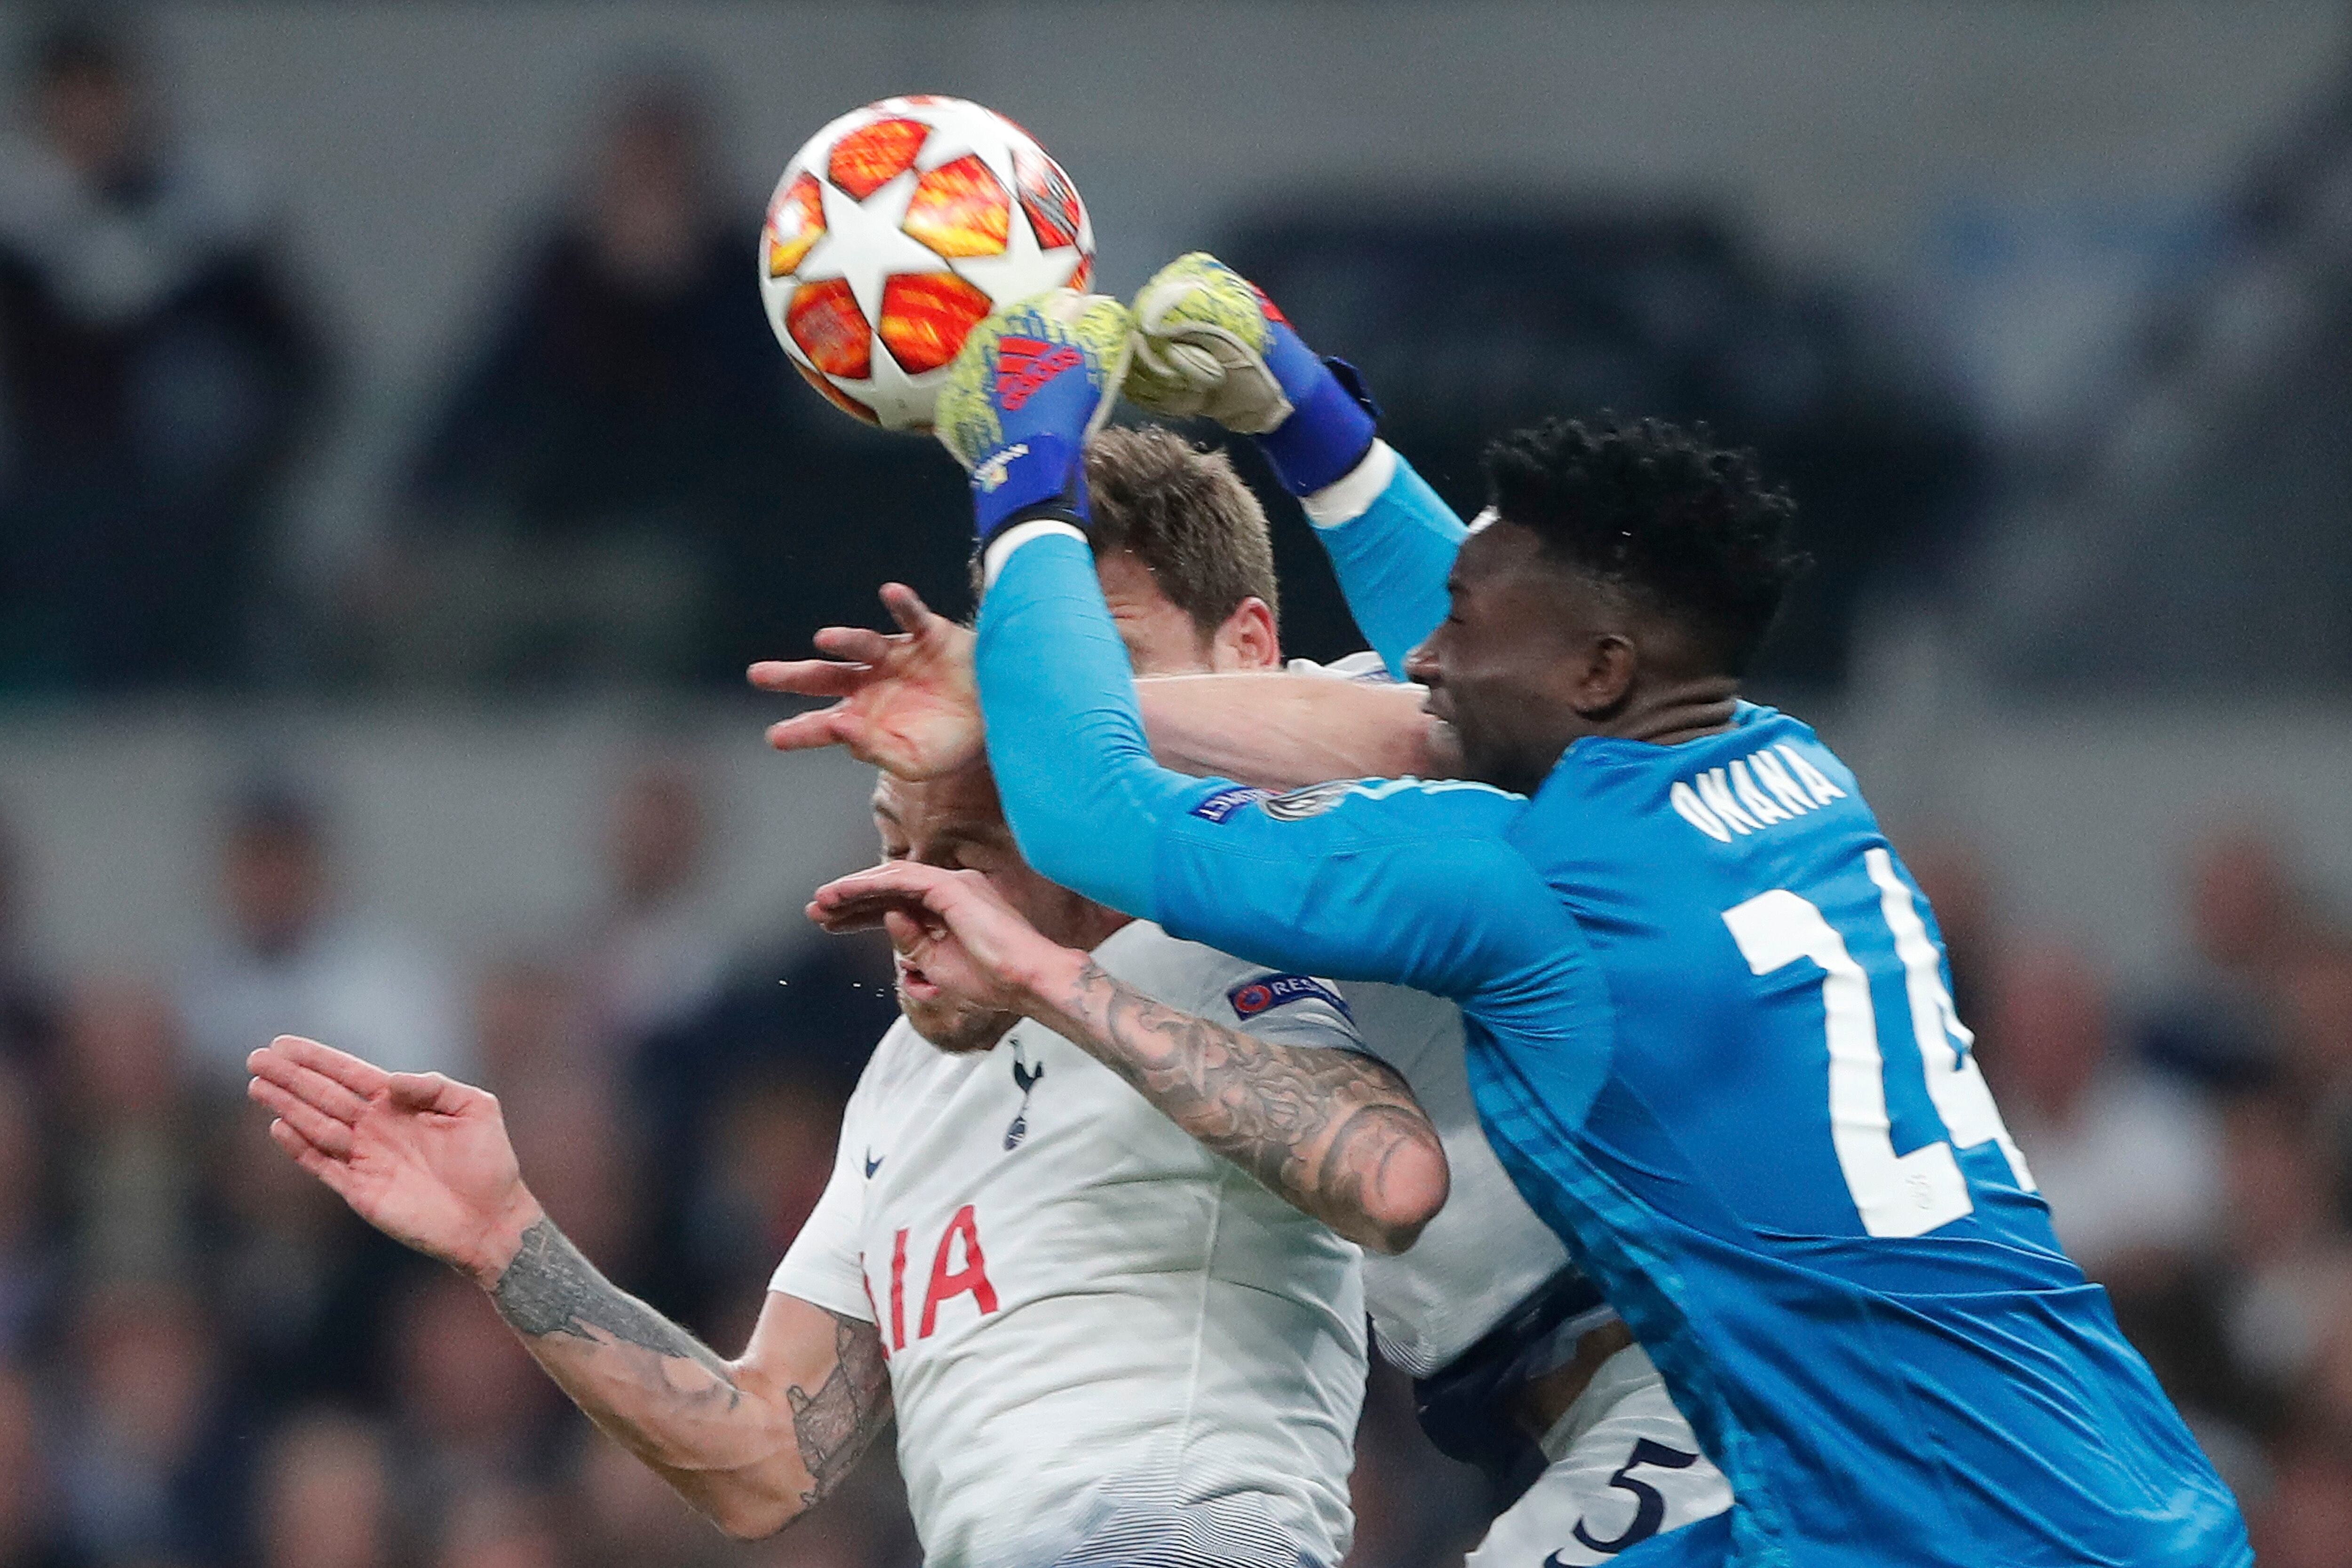 Tottenham's Toby Alderweireld, left, and Tottenham's Jan Vertonghen, center rear, and Ajax goalkeeper Andre Onana jump for the ball during the Champions League semifinal first leg soccer match between Tottenham Hotspur and Ajax at the Tottenham Hotspur stadium in London, Tuesday, April 30, 2019. (AP Photo/Frank Augstein)